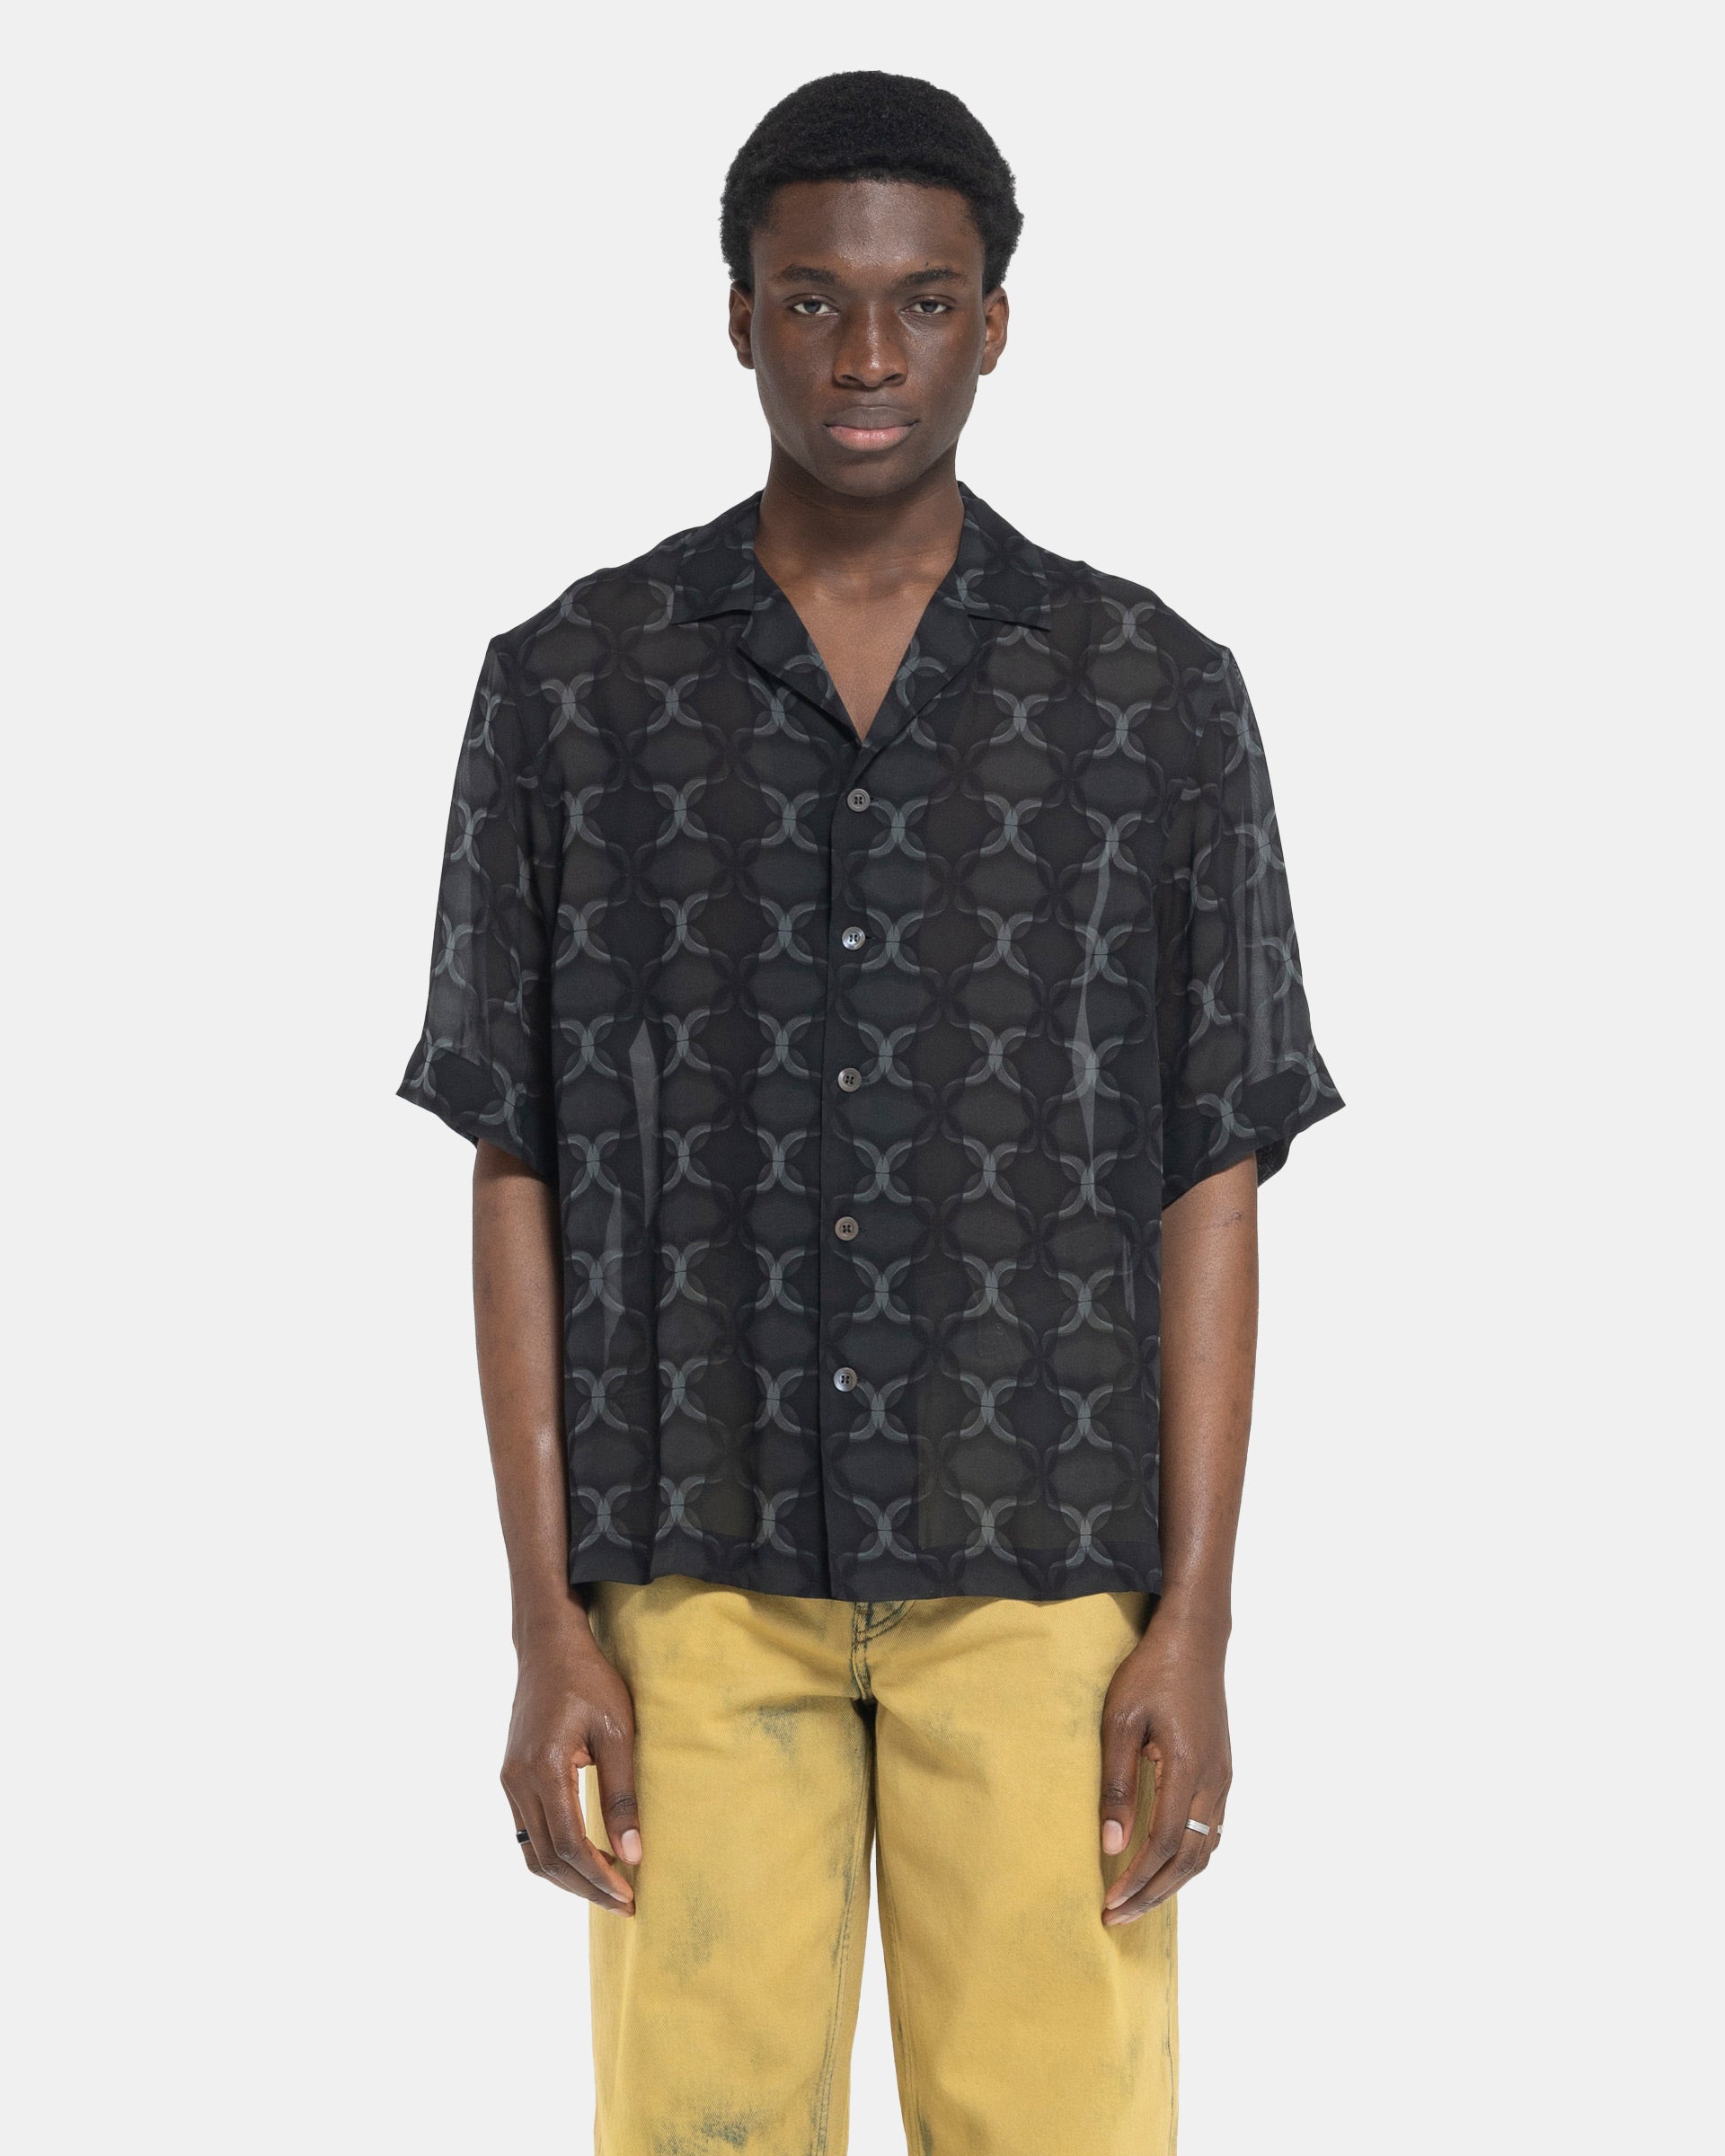 Model wearing Dries Van Noten Cassi Shirt in Anthracite on the white background